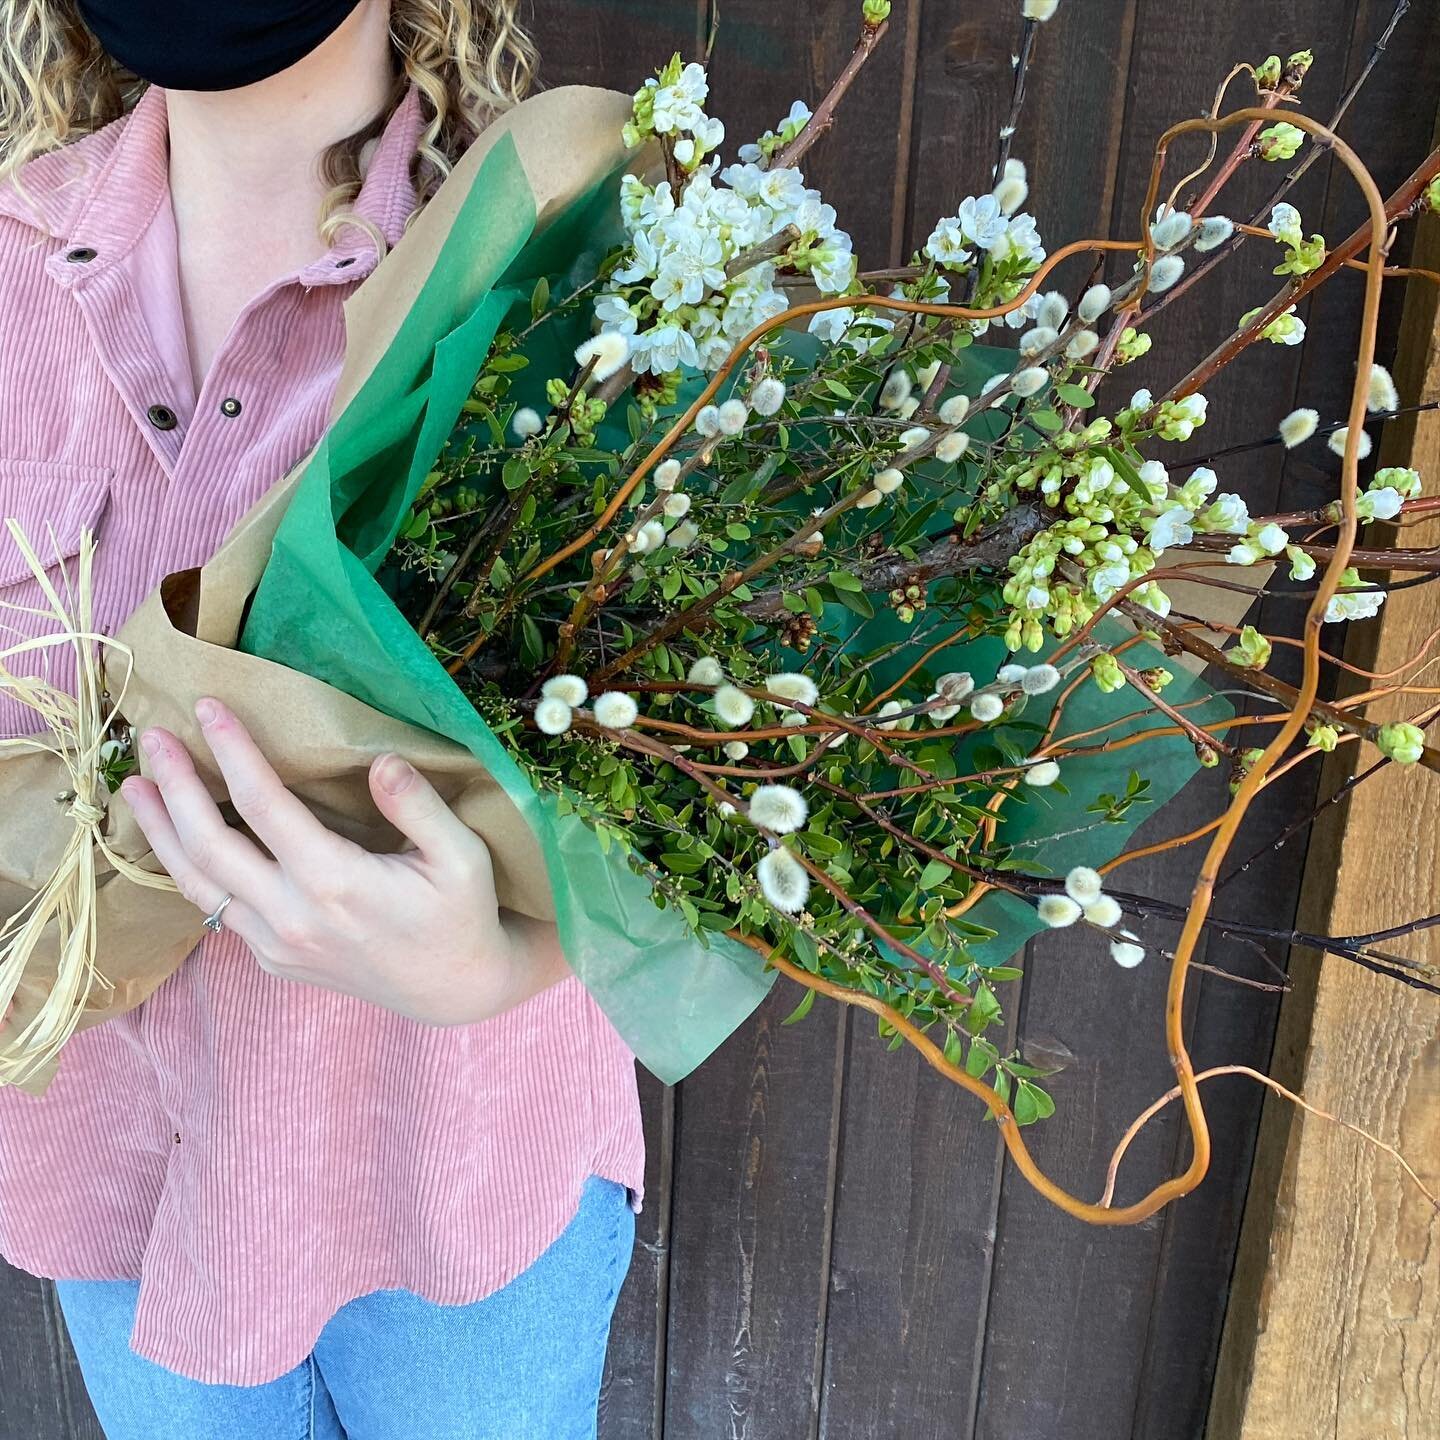 Oh my goodness these prunus branches came in out of this world awesome!! We loved creating this &lsquo;breath of spring&rsquo; bouquet today for a deserving mom!
.
.
#banff #banffmountaintopflowers #banffflorist #springflowers #giftofflowers #flowers